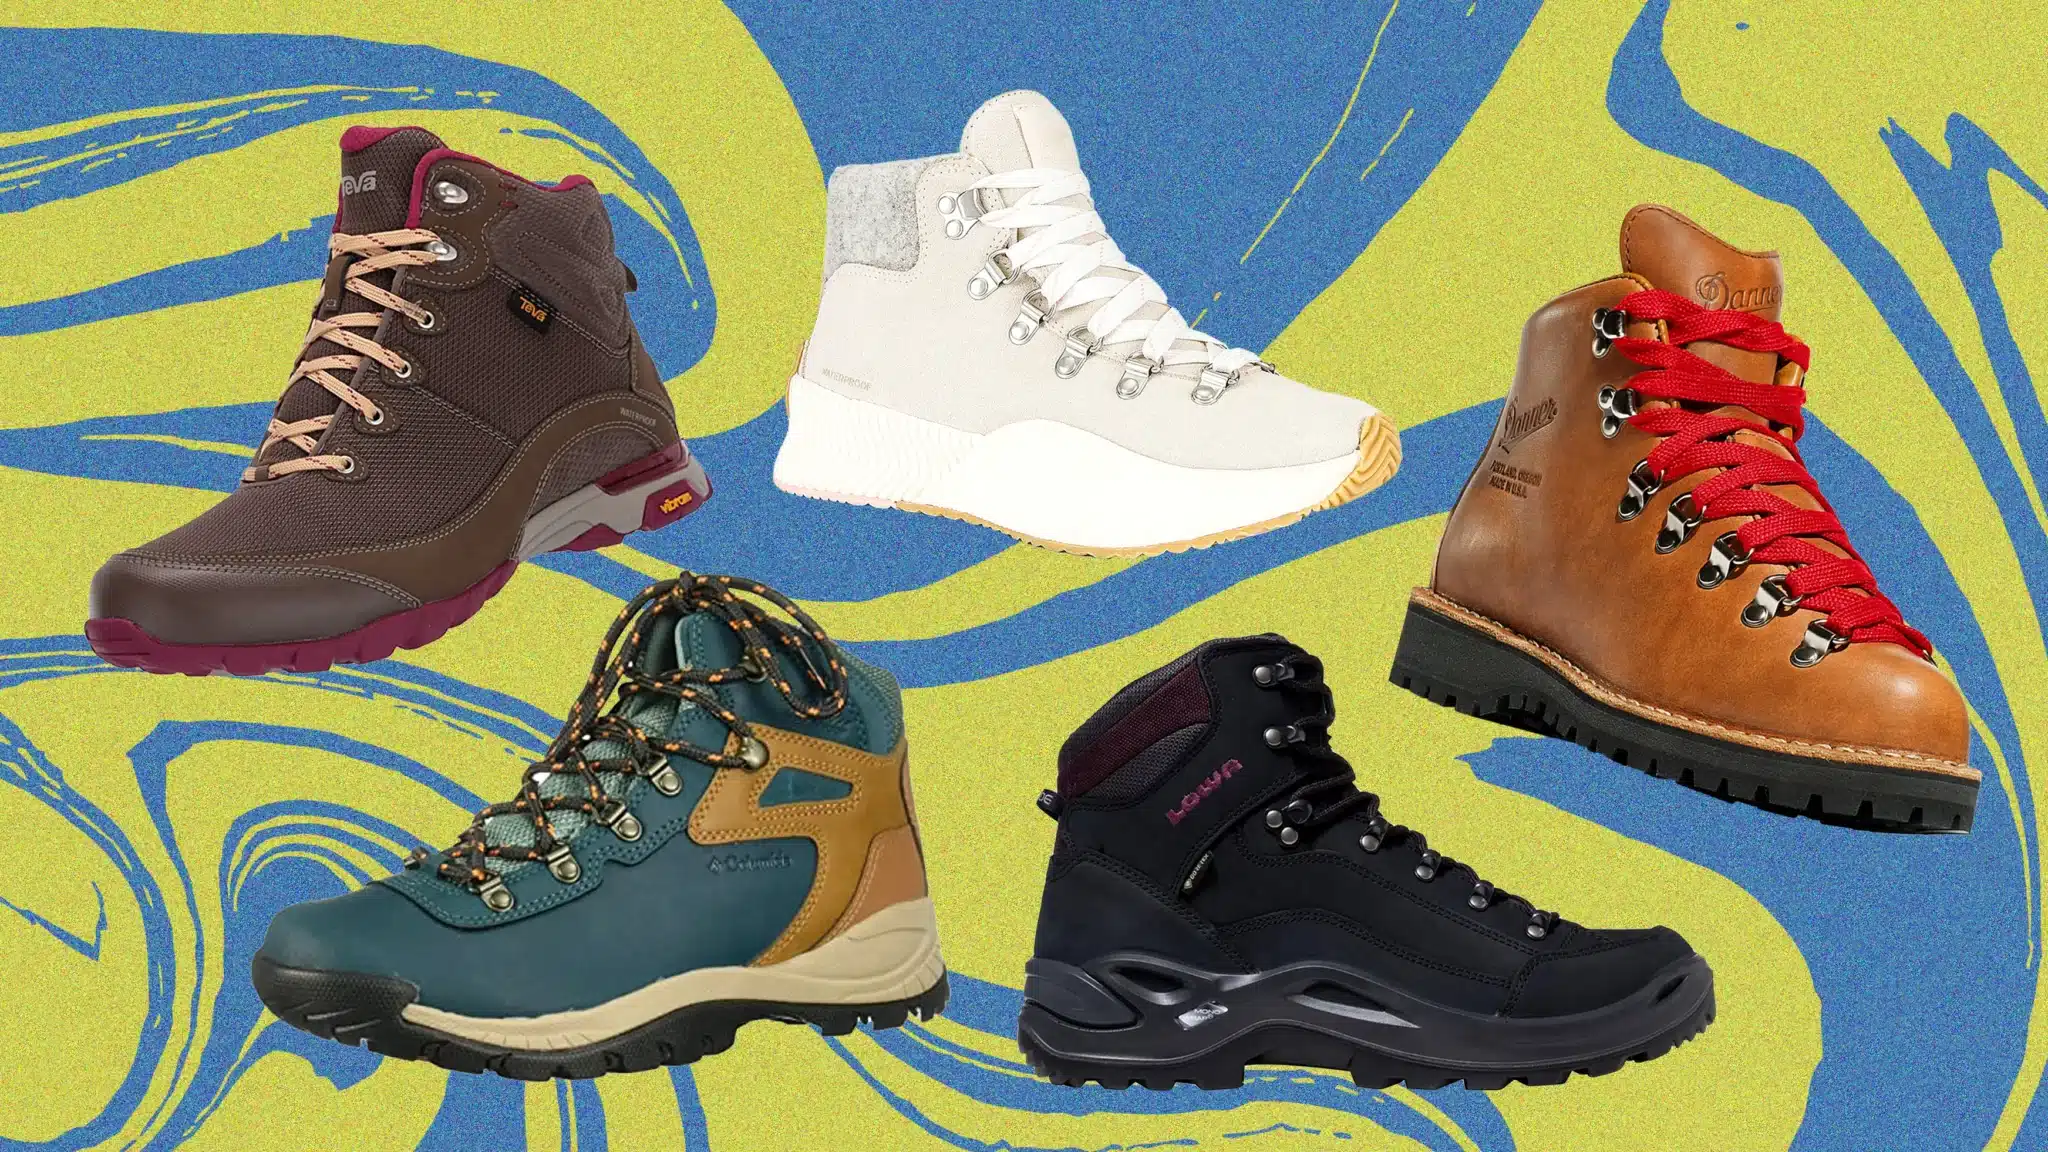 Mid-cut vs. High-Cut Hiking Boots: Which is Best?